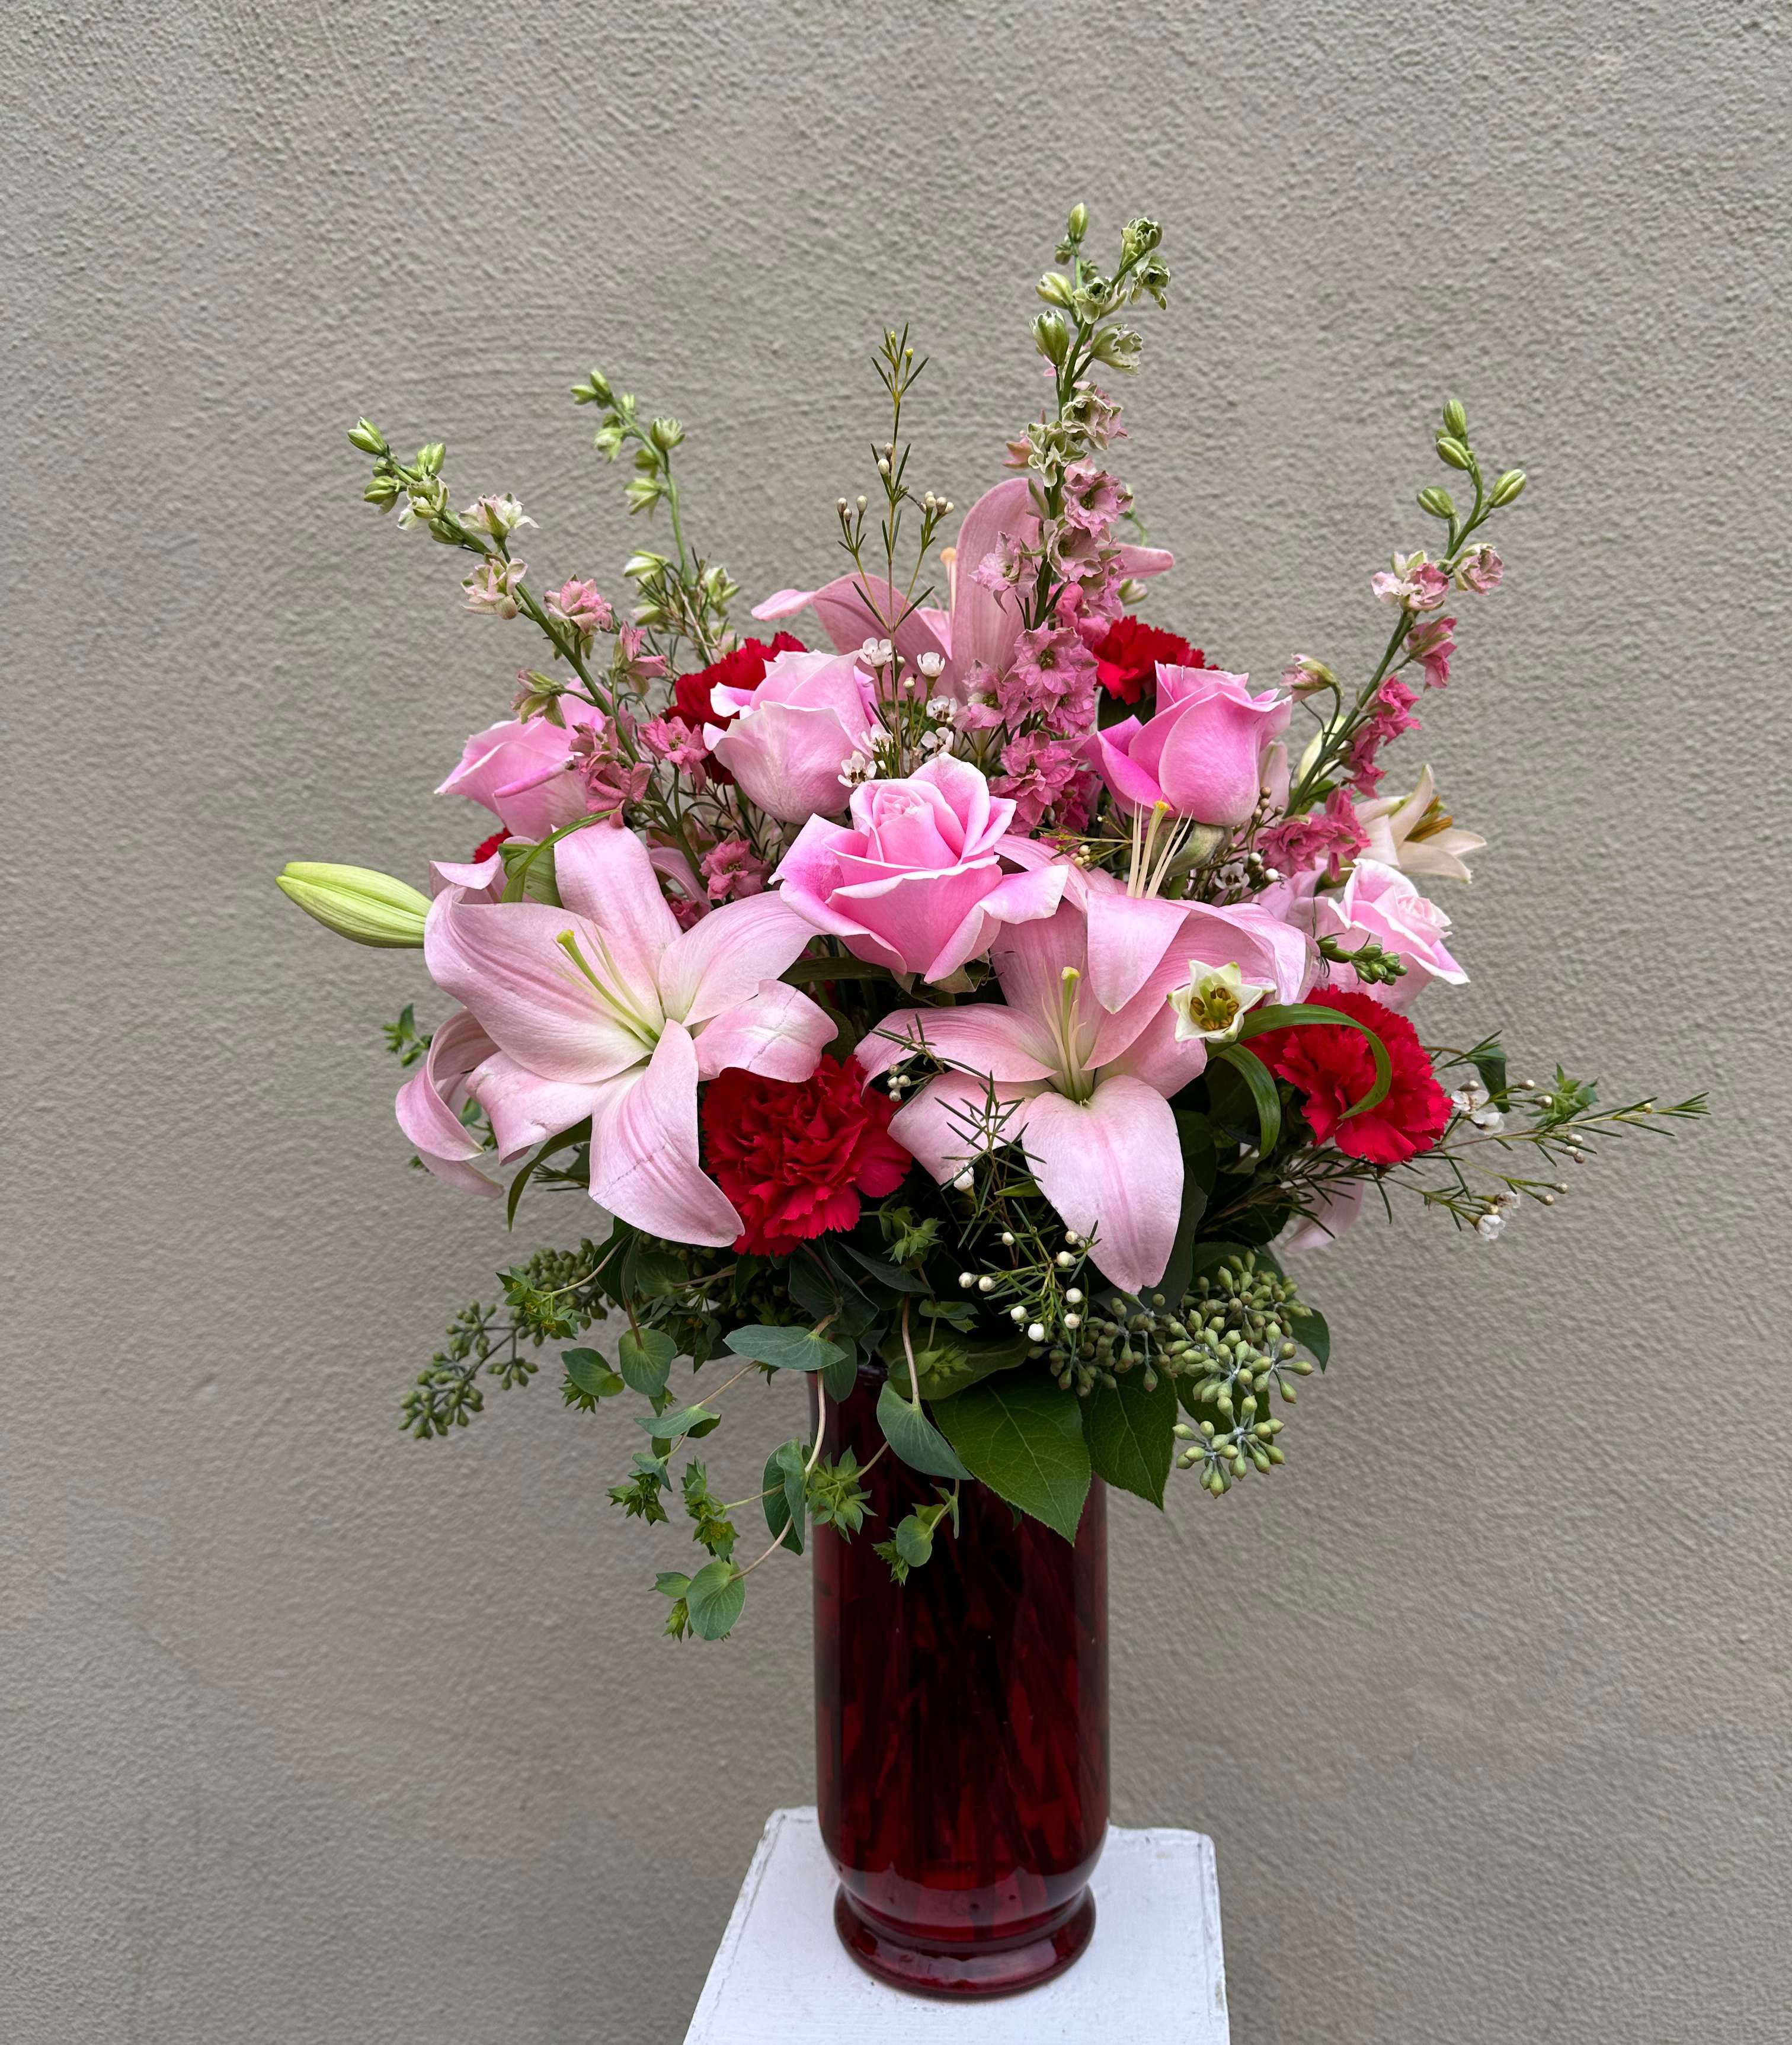 Pink Expression - This truly original arrangement of pink roses, lilies, carnations, larkspur, waxflower and more will leave her smiling brighter than the vase it arrives in! We think it's a brilliant gift idea for birthdays, anniversaries or Valentine's Day you want to put that special someone in the spotlight. Luxurious arrangement of gorgeous pink roses, lilies, carnations, Larkspur and waxflower, accented with seeded eucalyptus, bupleurum and salal Artistically designed by our expert florists.; red glass bell vase measures 10&quot;H